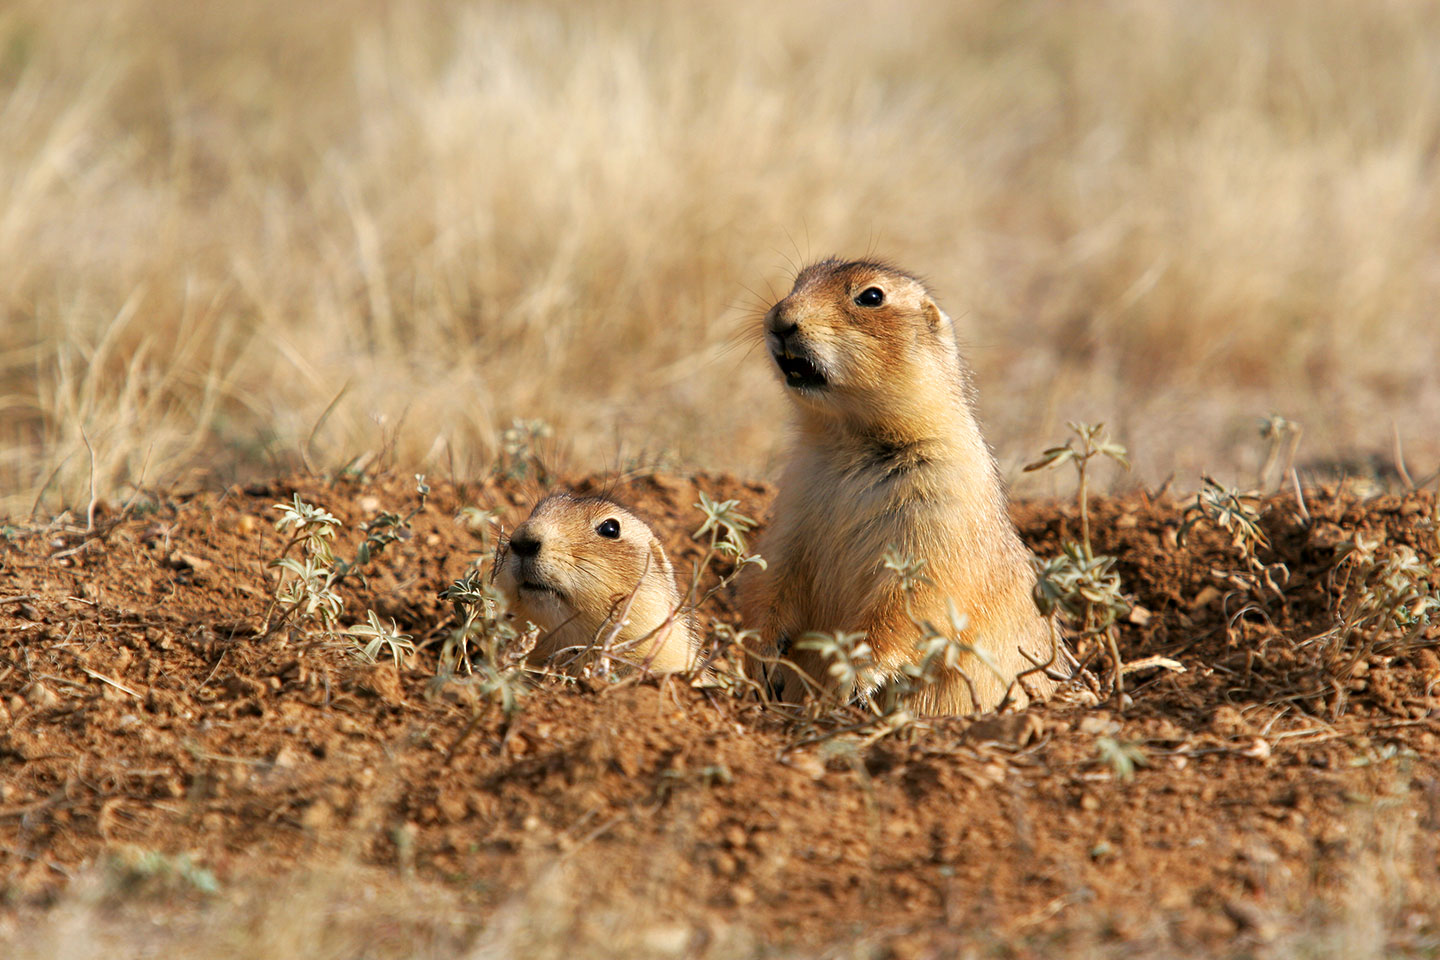 Groundhogs in a National Park in Wyoming